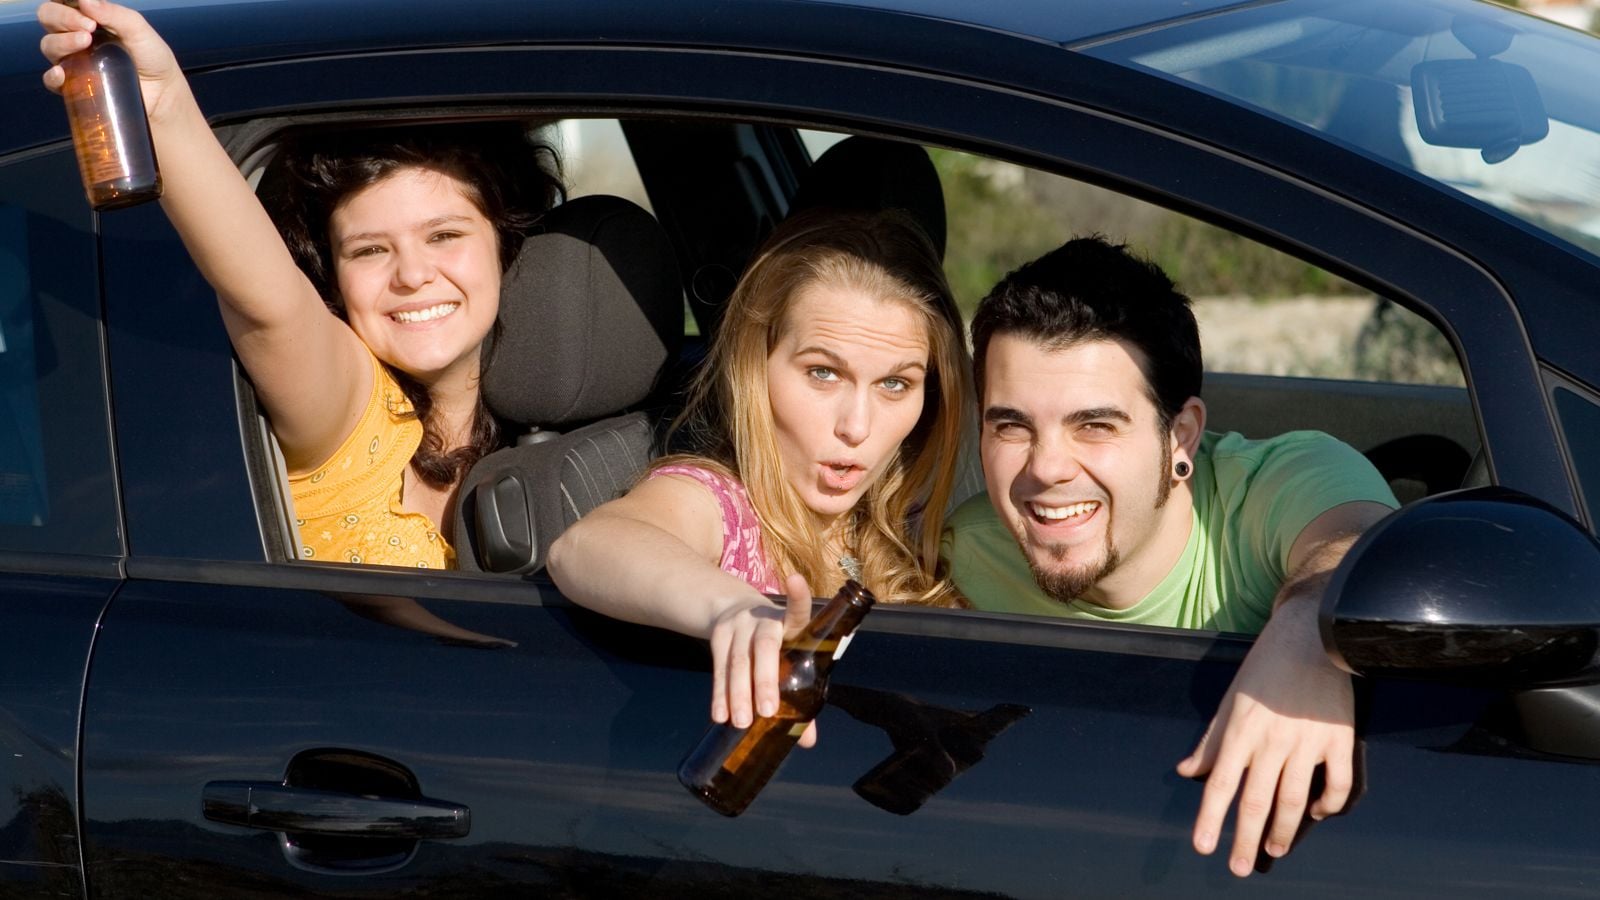 teens drinking while driving